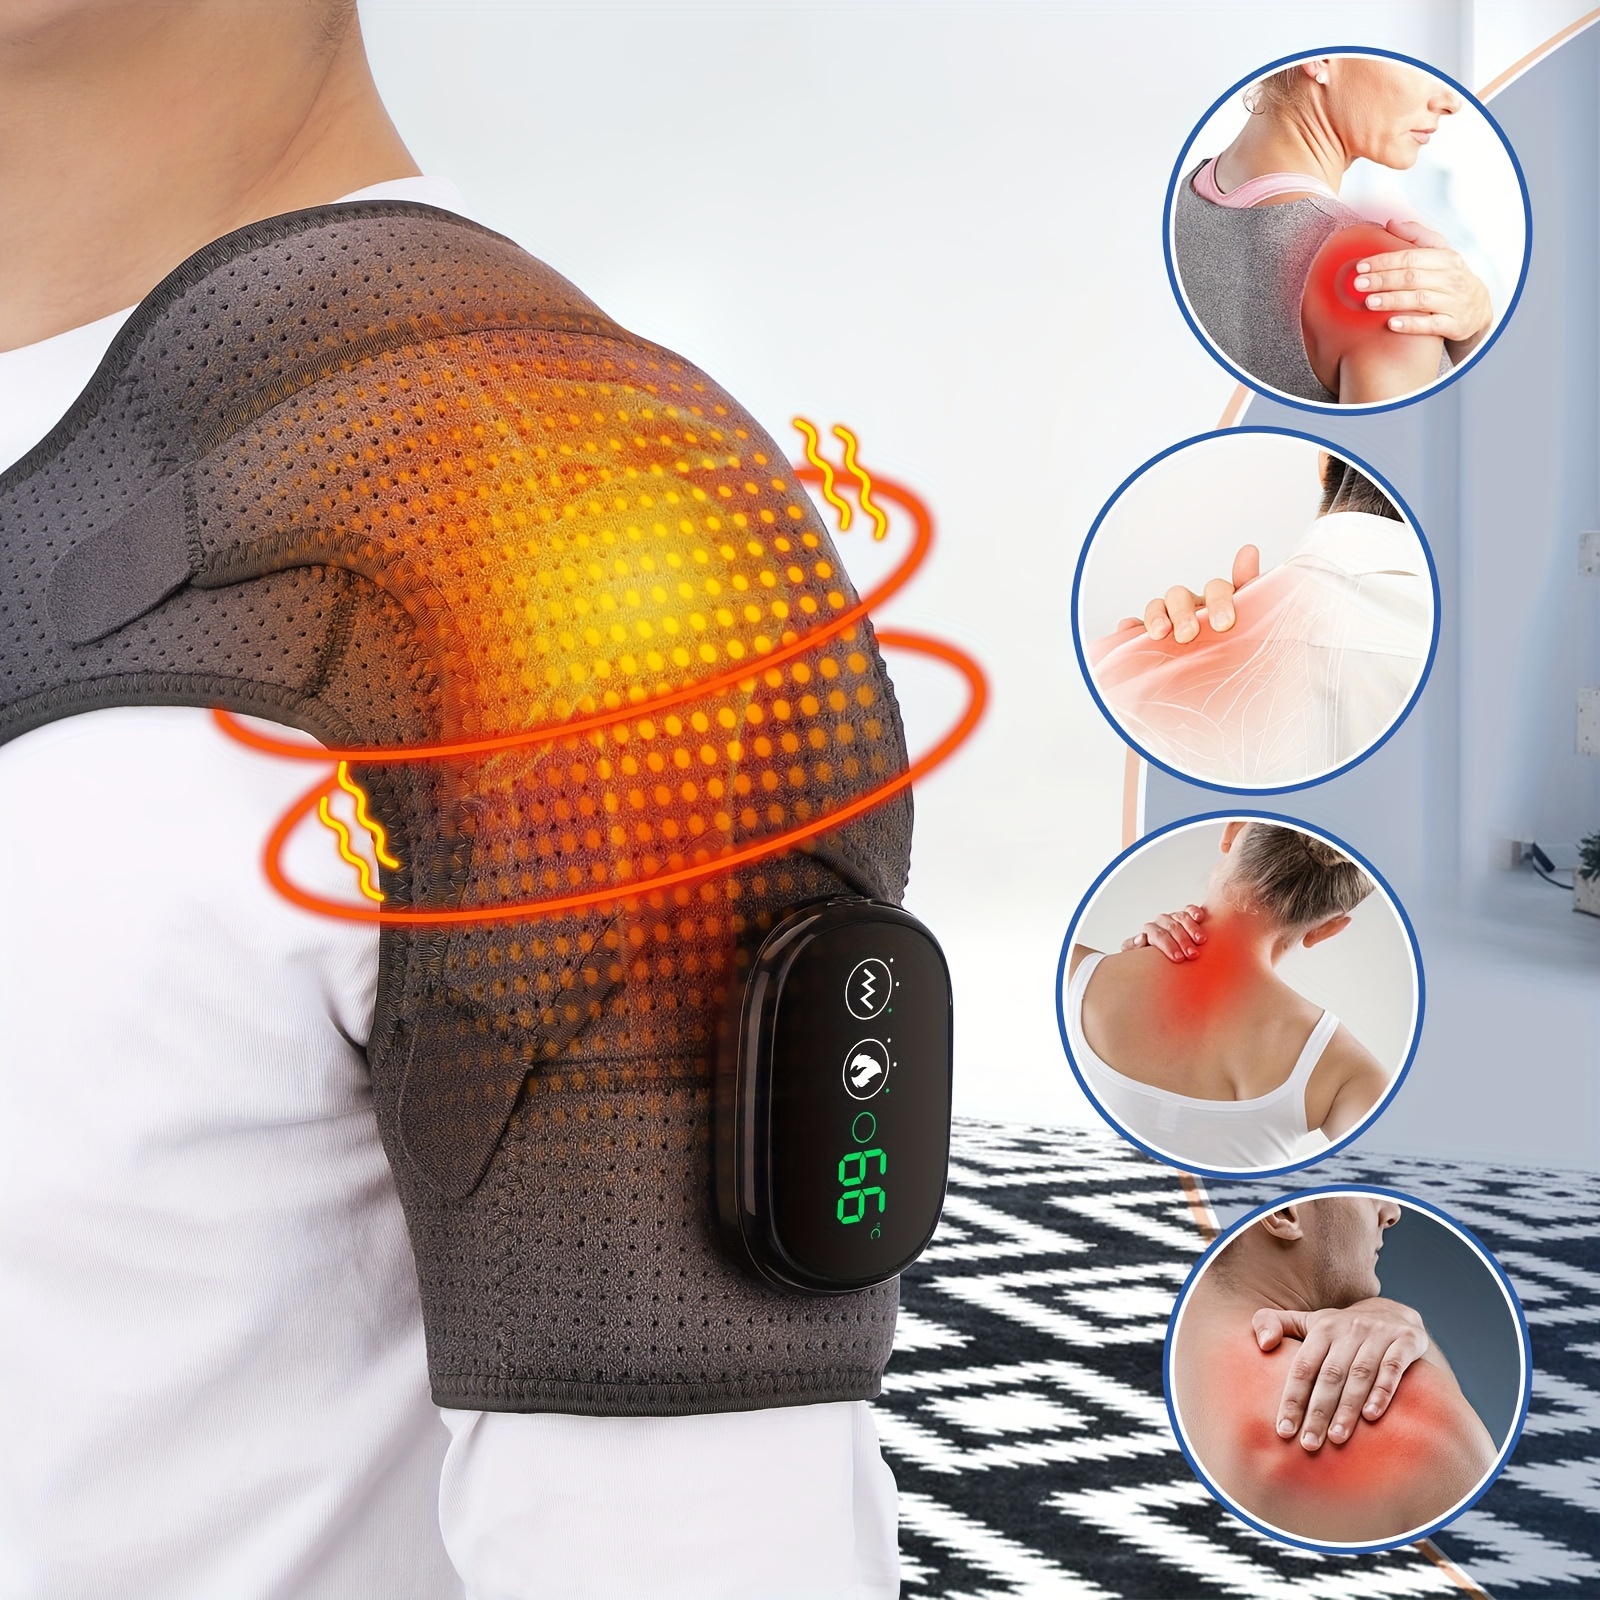 Heated Shoulder Wrap for Men Women, Upgrade Electric Heating Pad Massager  with 3 Vibration and Heat Settings and Timer, Shoulder Braces for Rotator  Cuff, Fits for Left or Right Shoulder, Black 